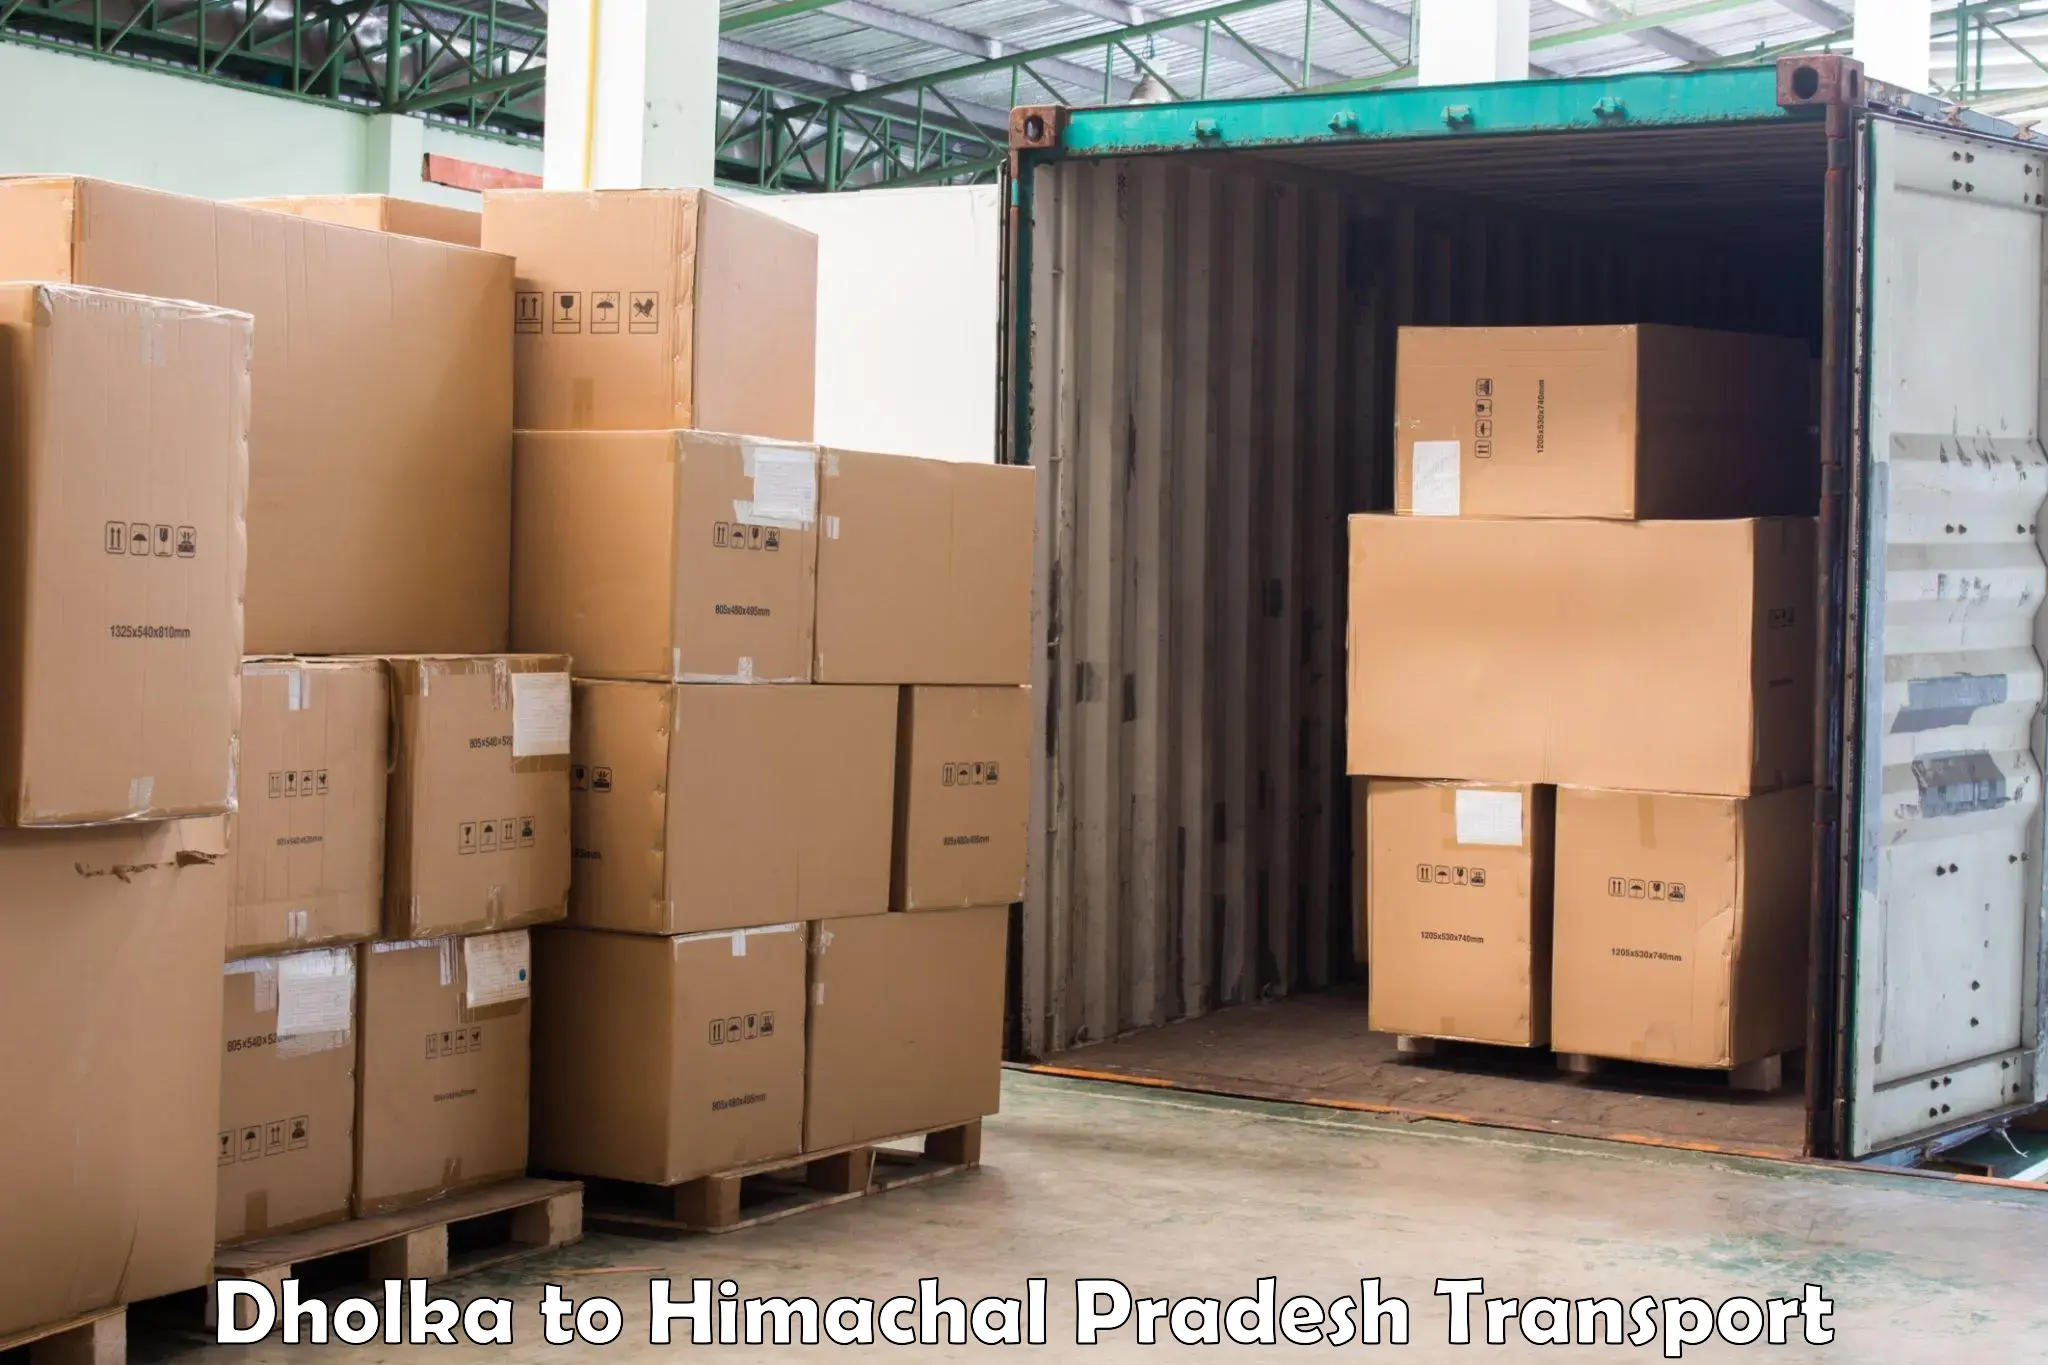 Truck transport companies in India Dholka to Palampur